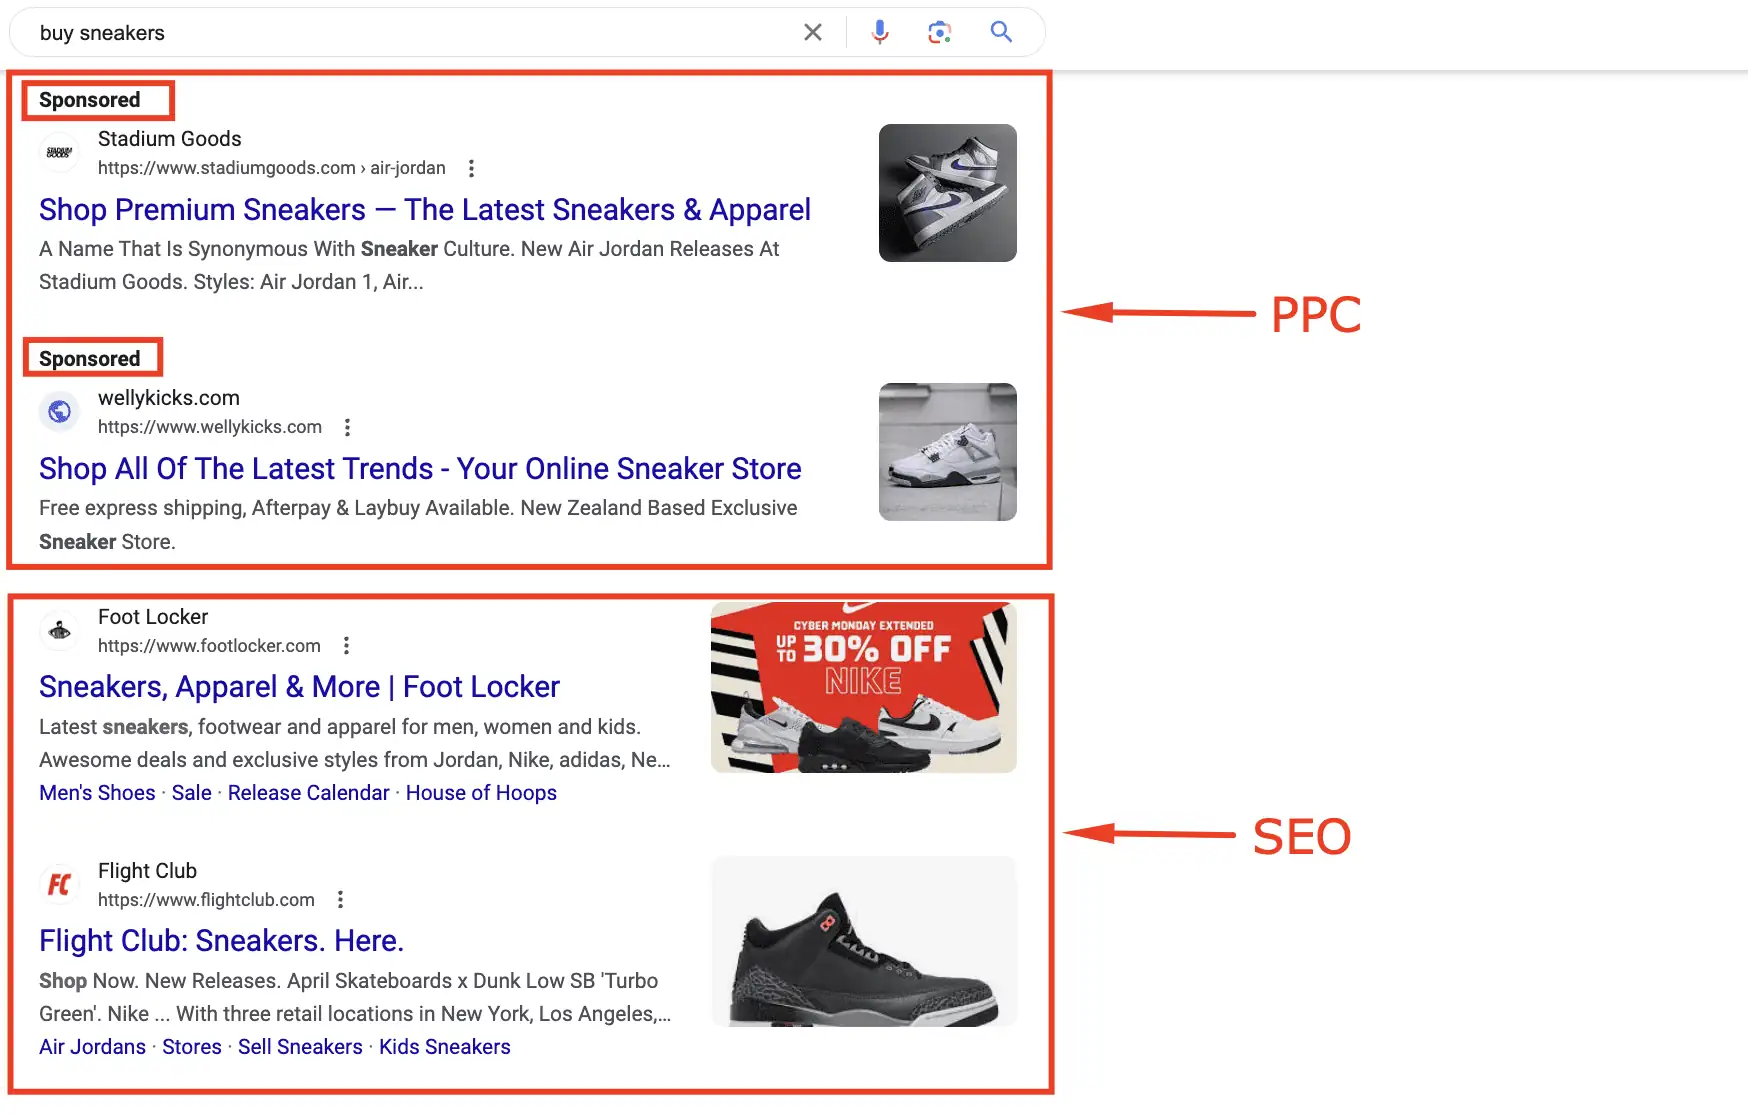 PPC and SEO in SERP by "buy sneakers" query 